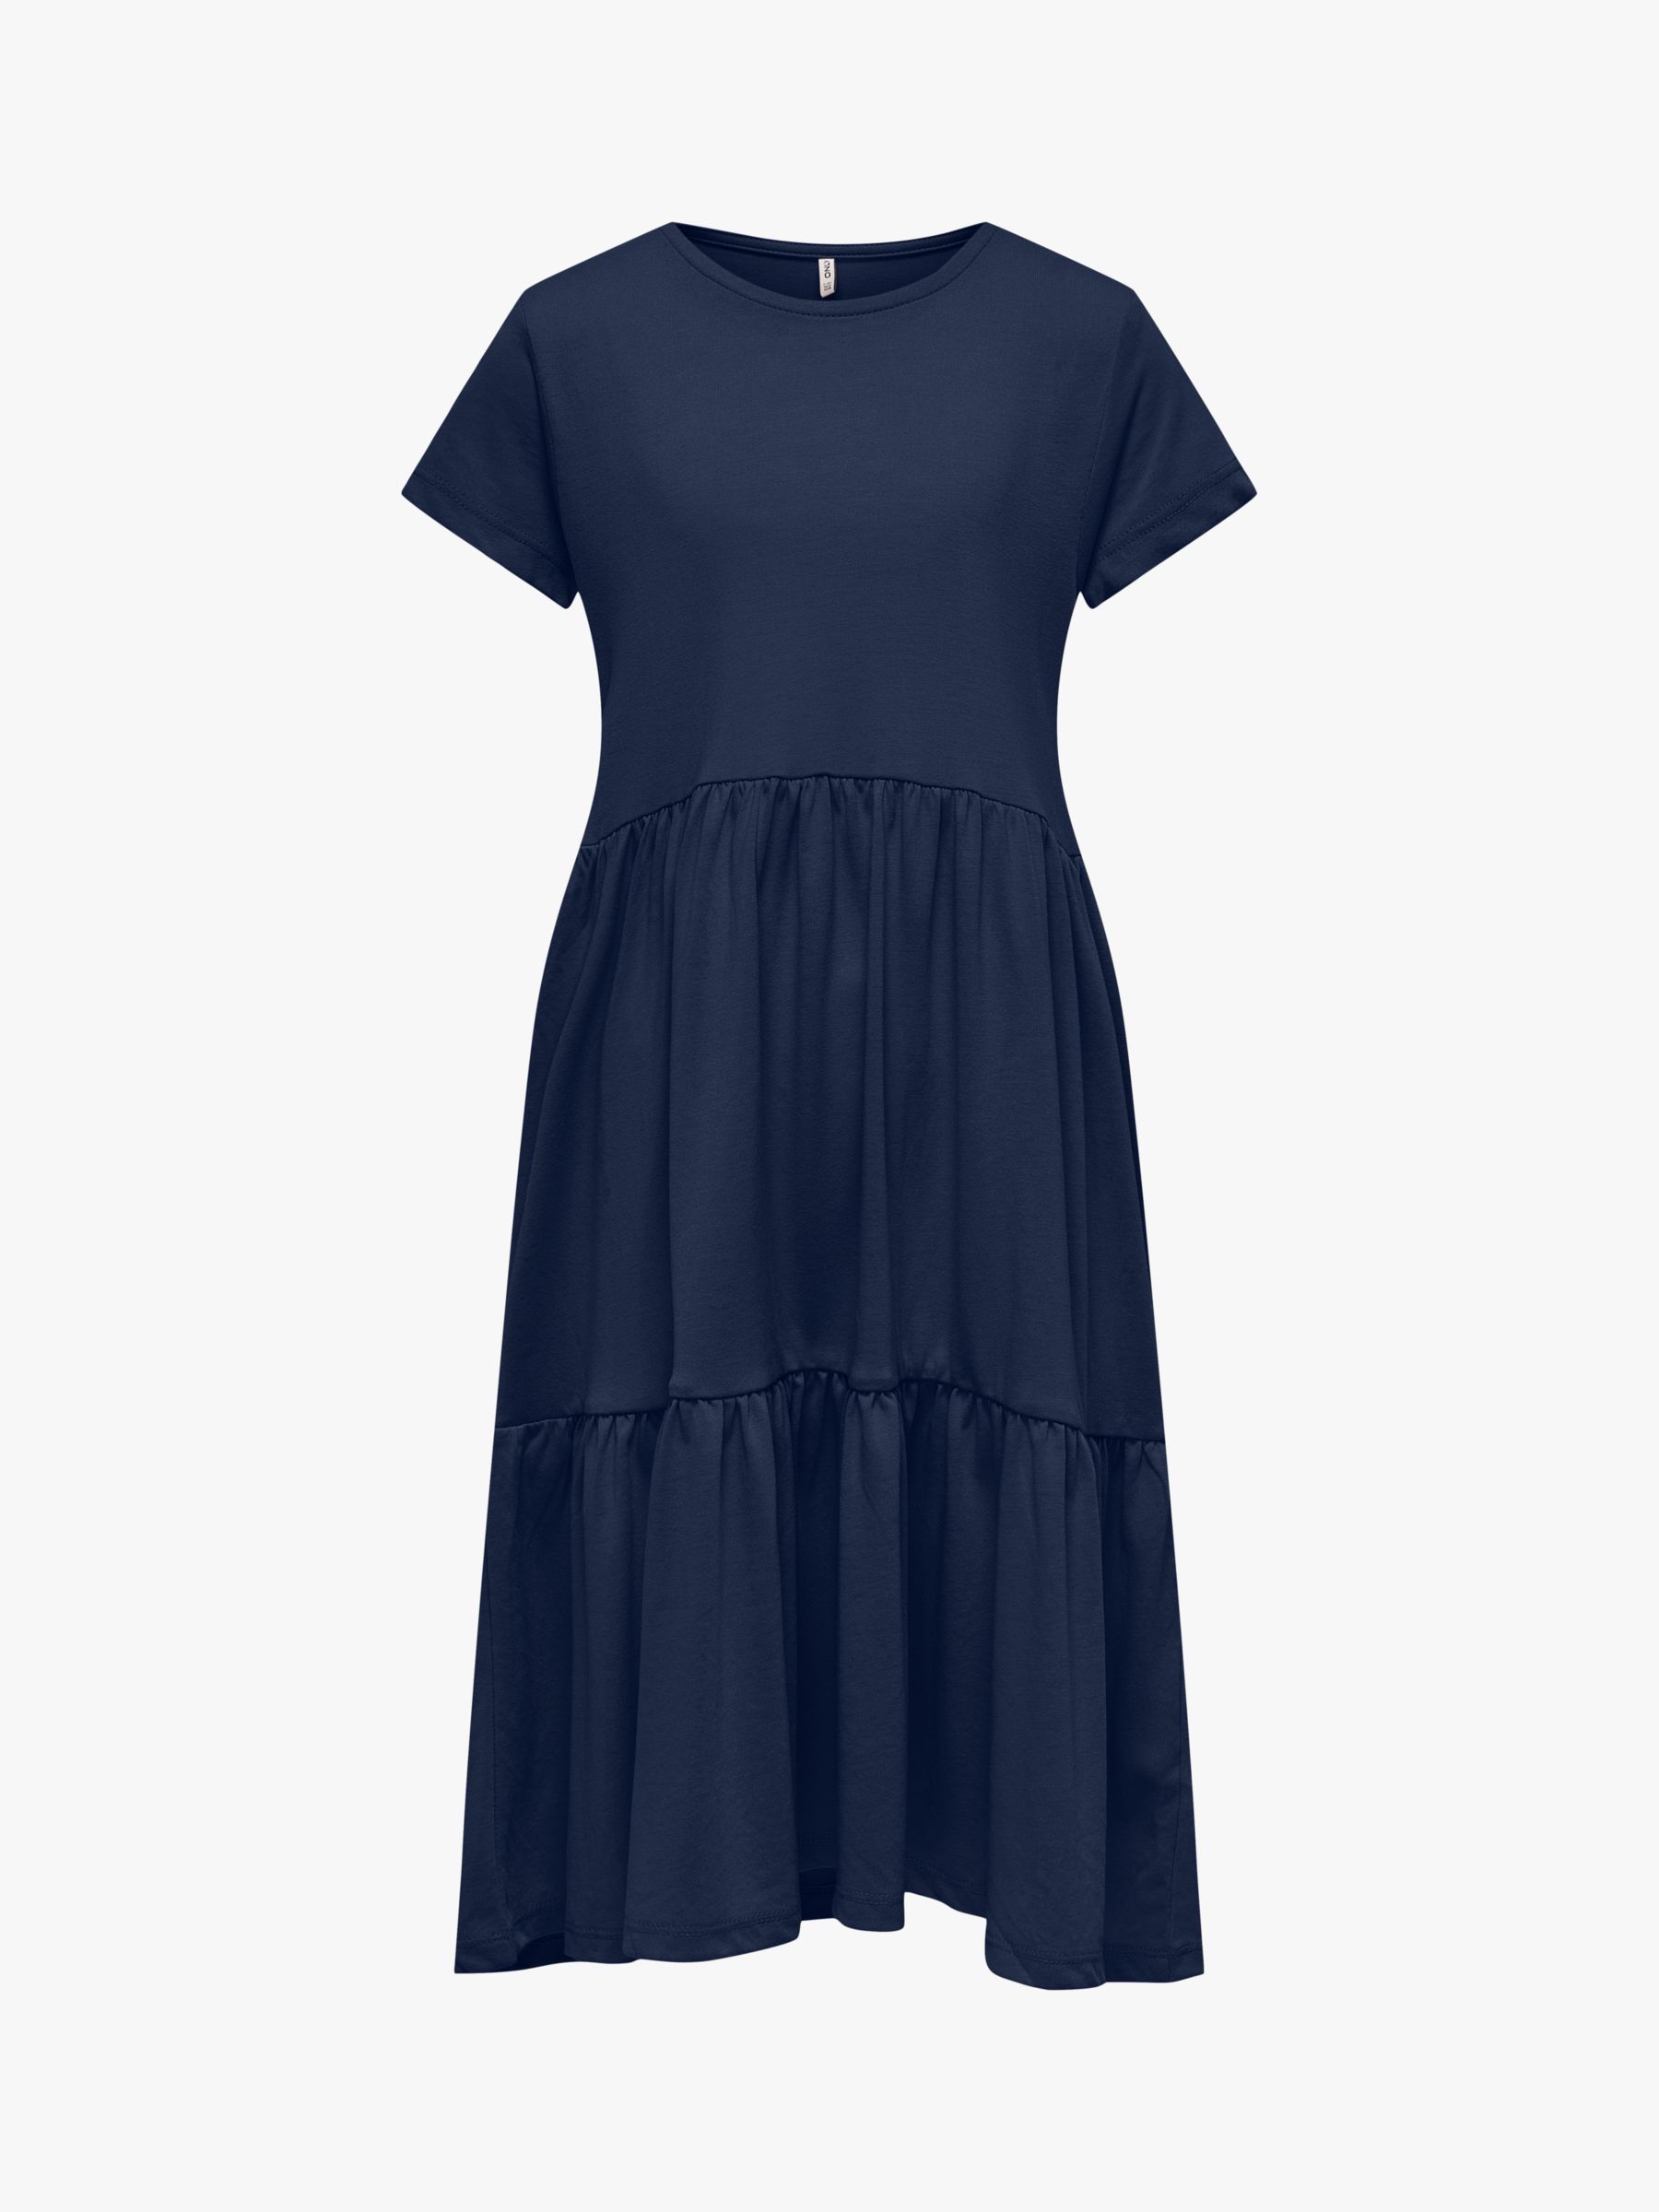 Kids ONLY Kids' Long Tiered Dress, Naval Academy at John Lewis & Partners